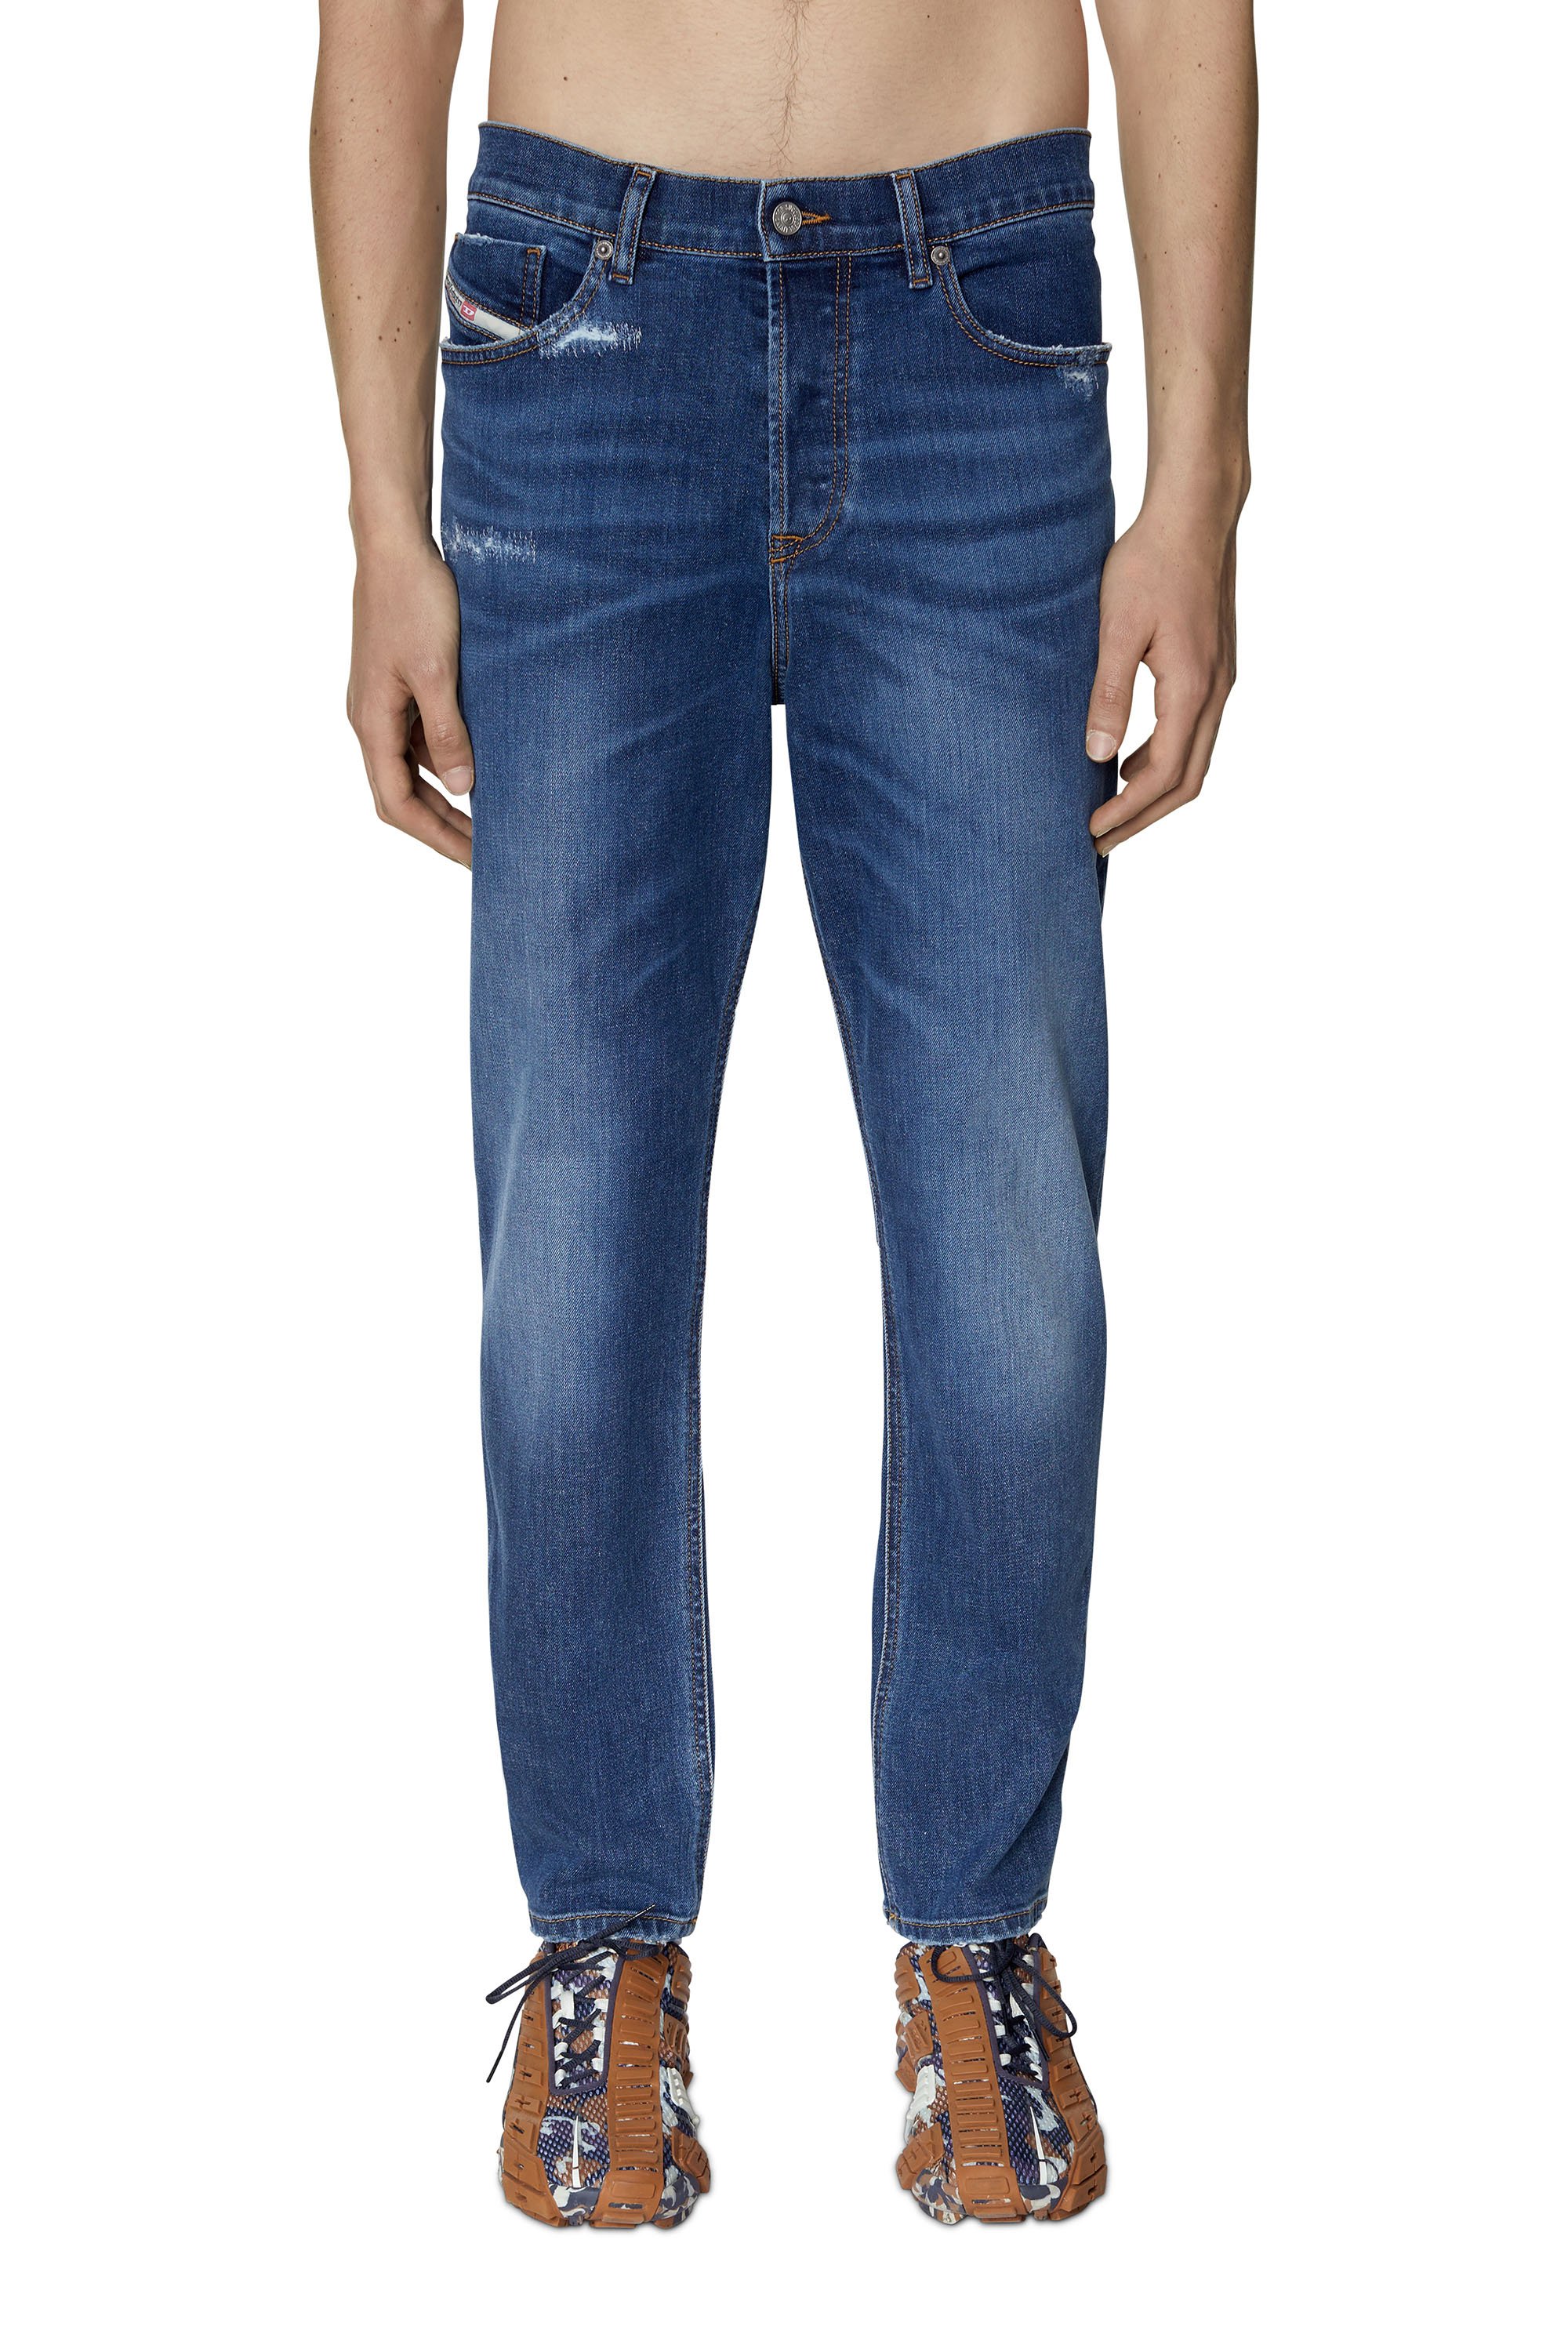 2005 D-FINING 09E07 Tapered Jeans, Blu medio - Jeans